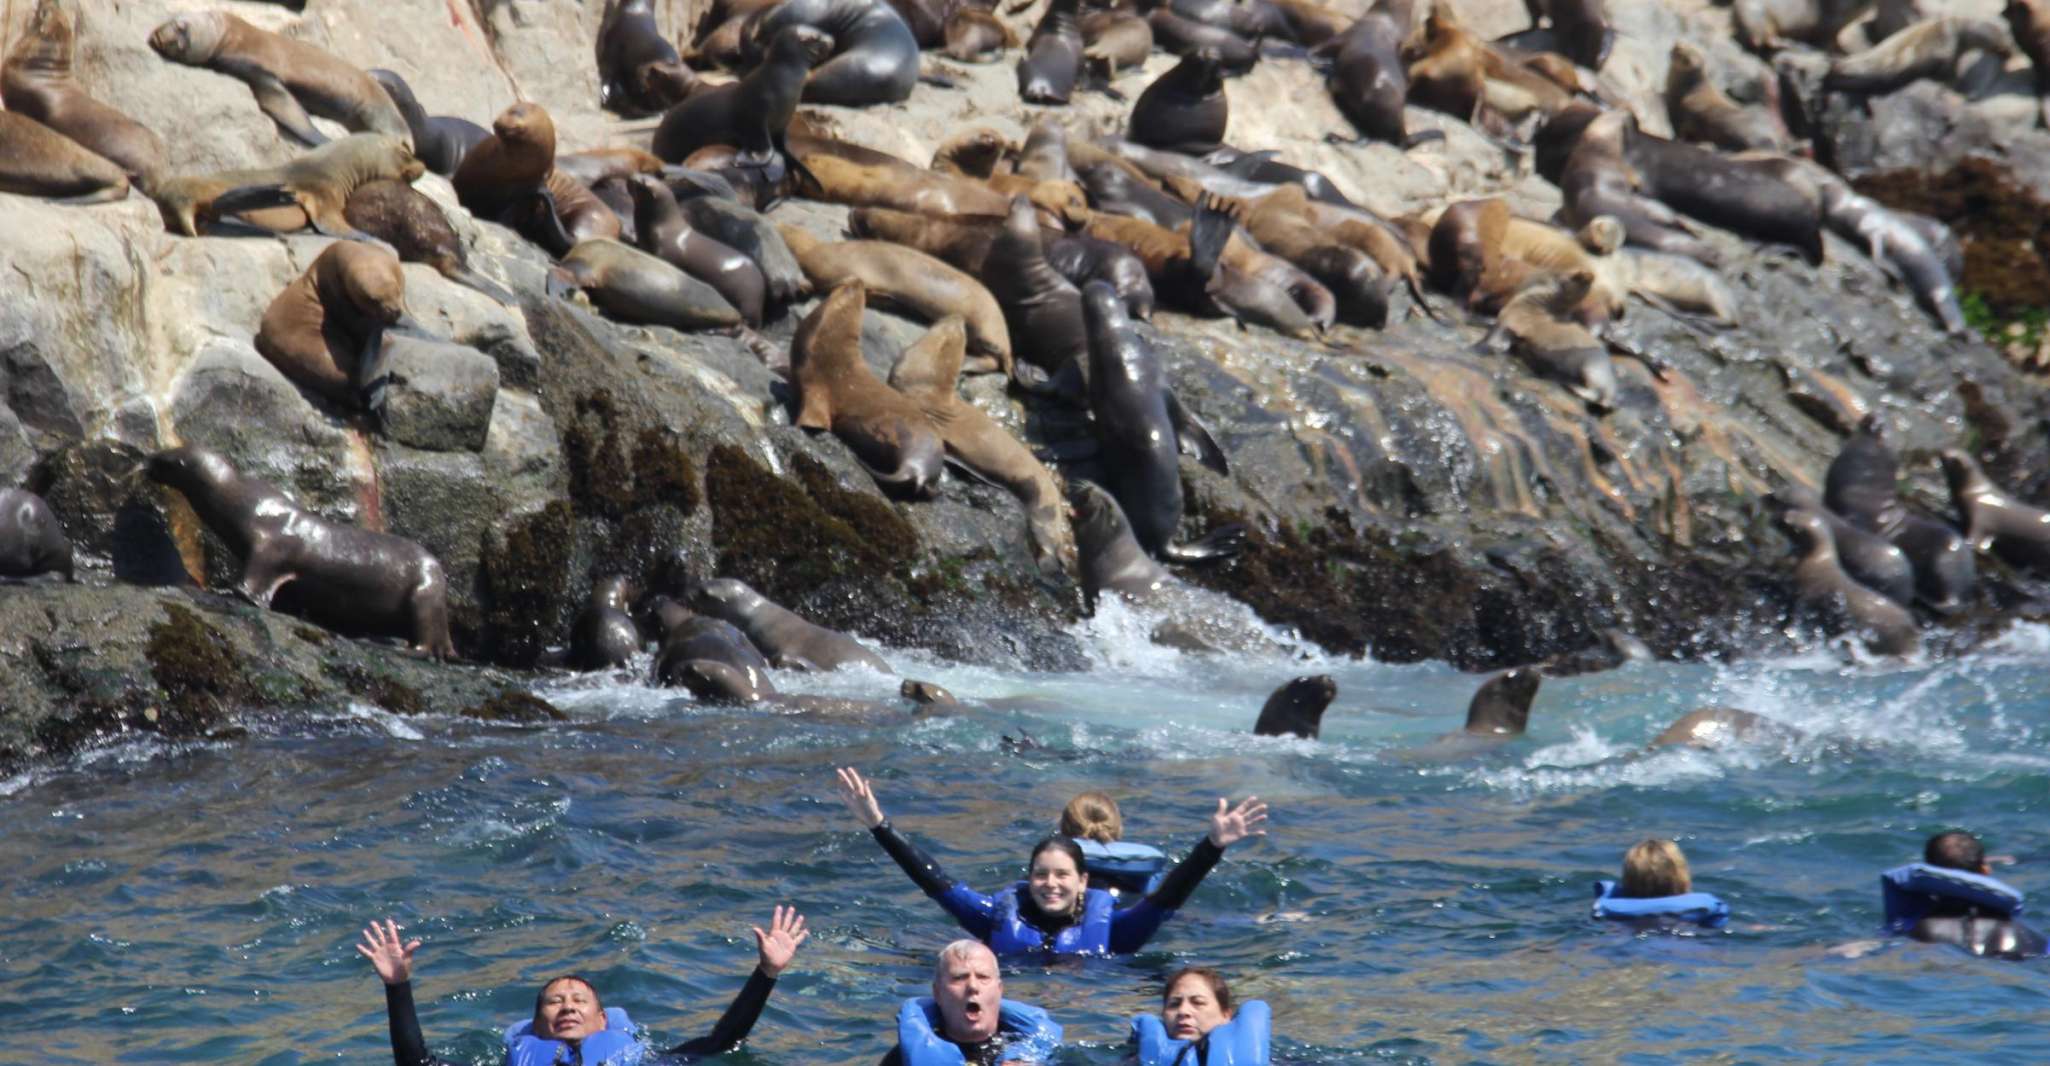 Palomino Islands, Swim with Sea Lions in the Pacific Ocean - Housity